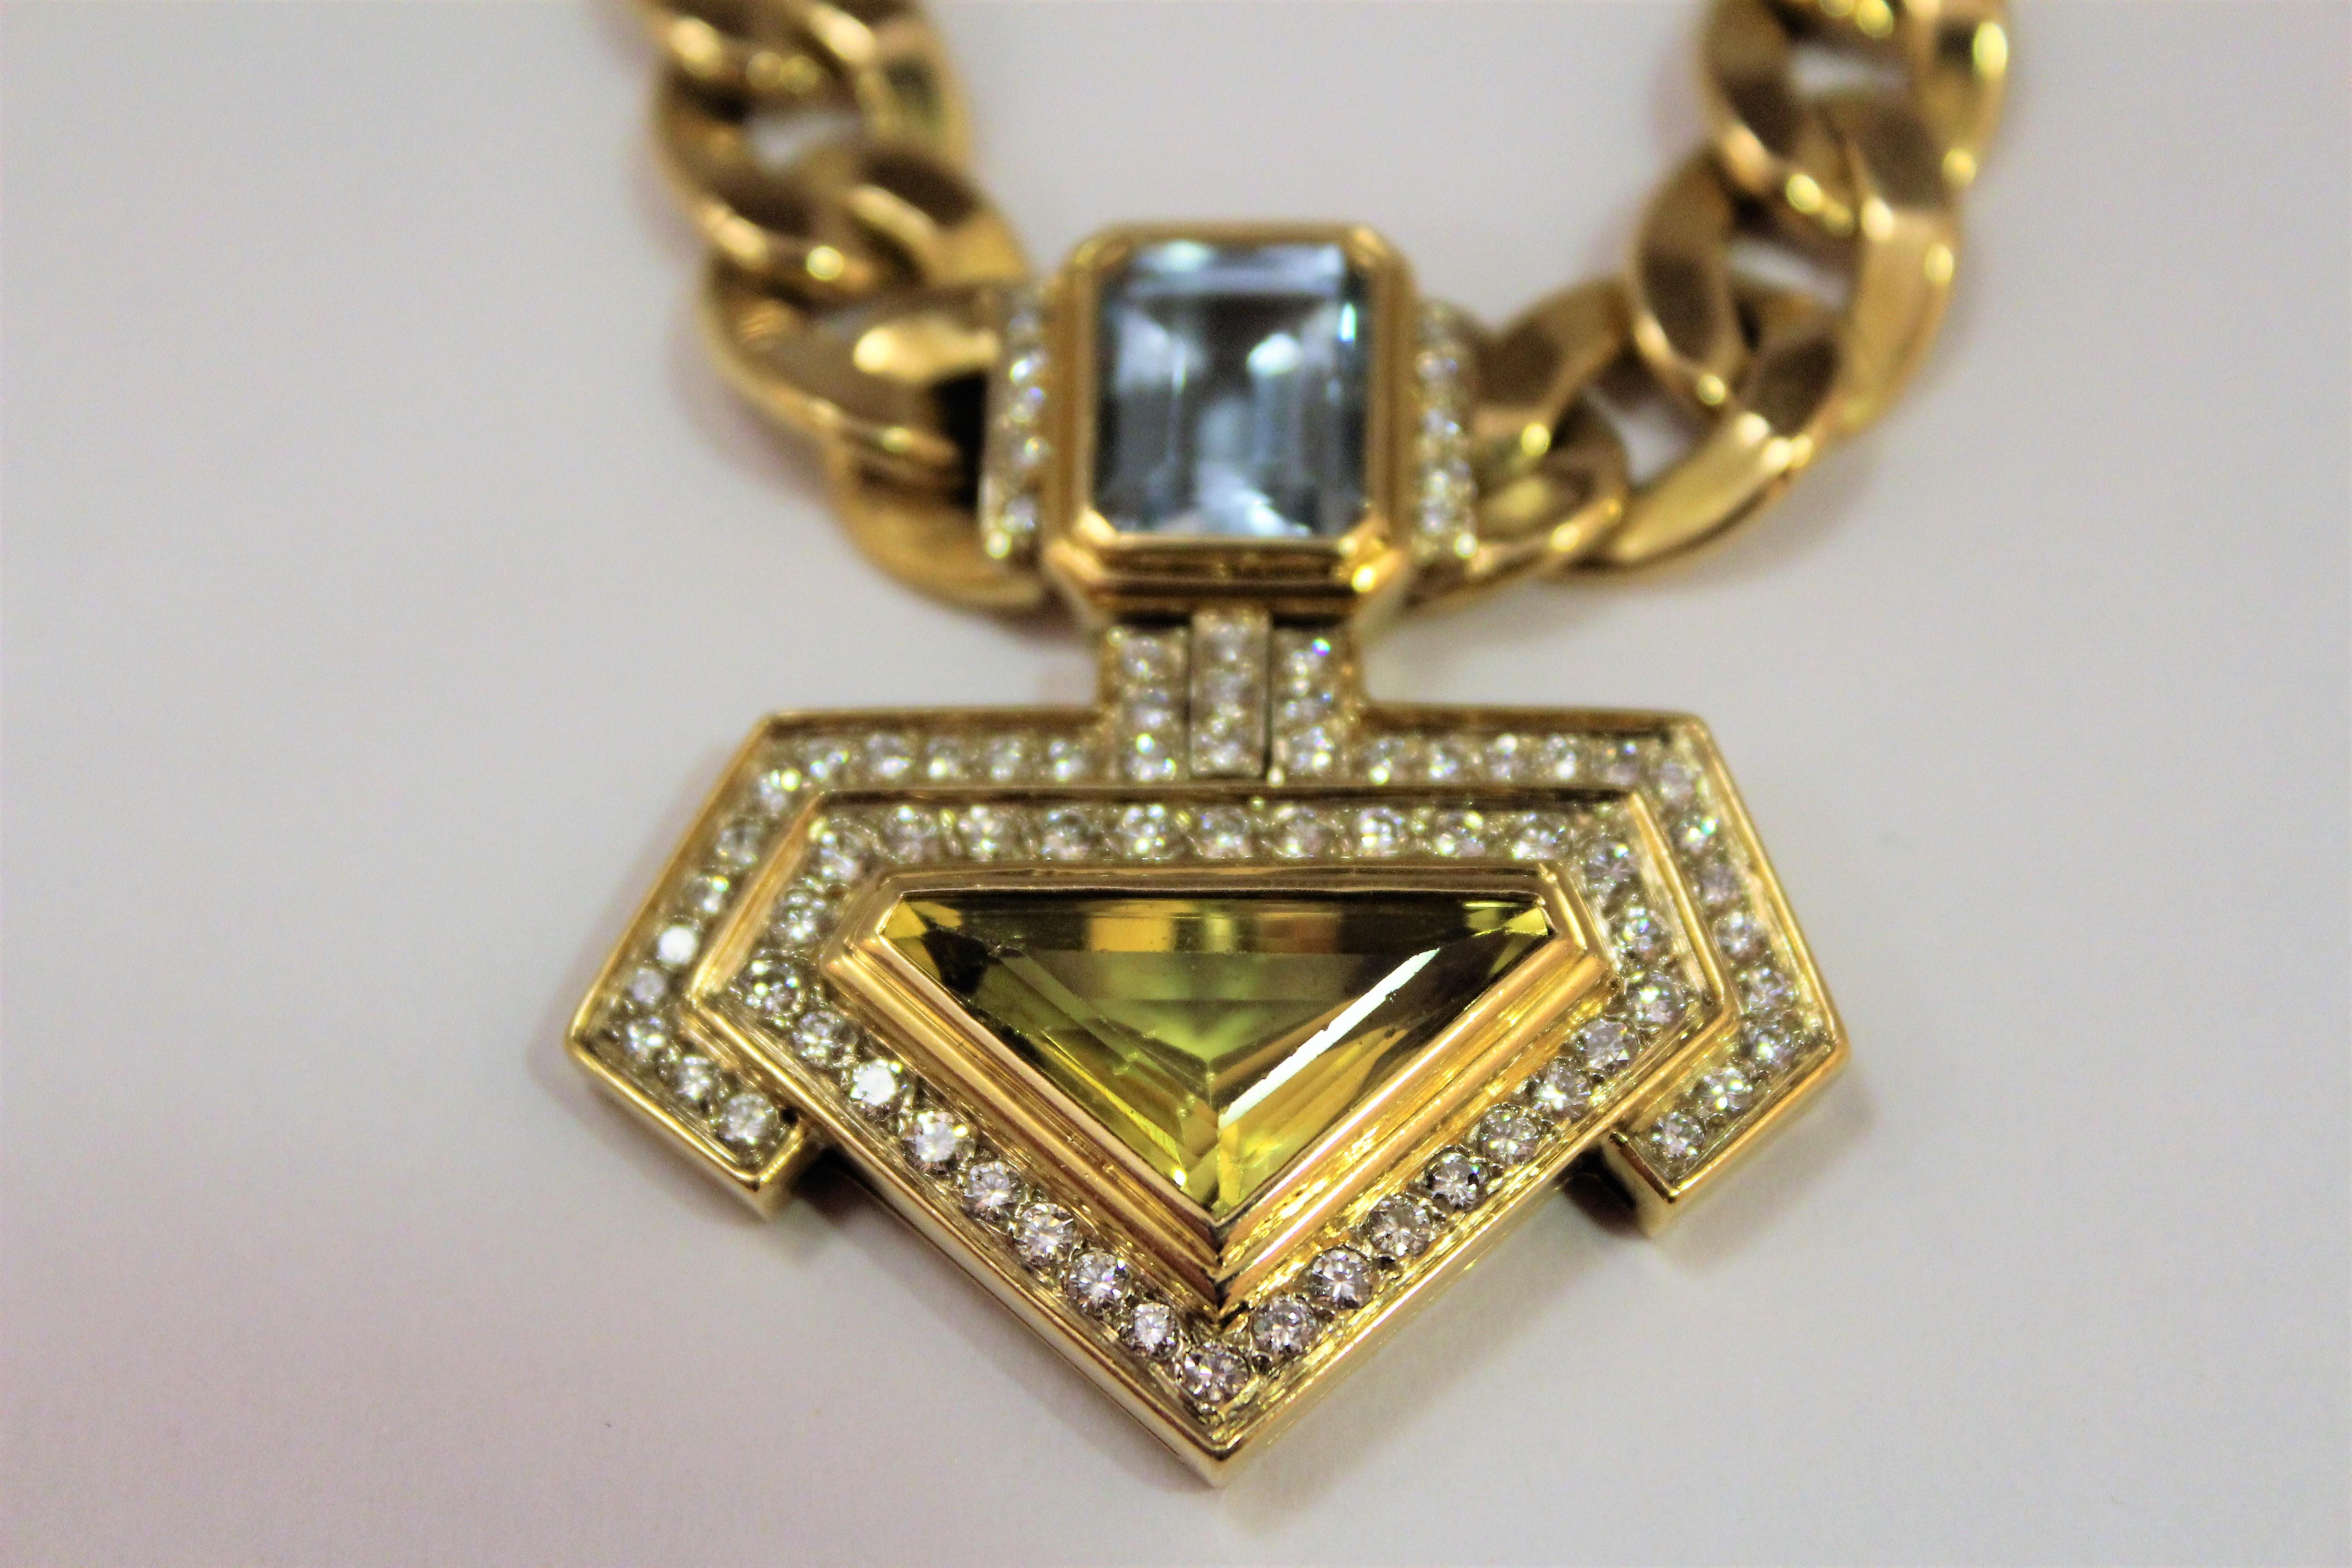 Impressive 18K gold pendant necklace, with
 3 ct blue natural Topaz emerald cut
4.5 ct yellow  Quartz triangle cut
2 ct round diamonds g/h colour, vs purity
total weight 49.2 grams
Italian made in Florence, around 1980s